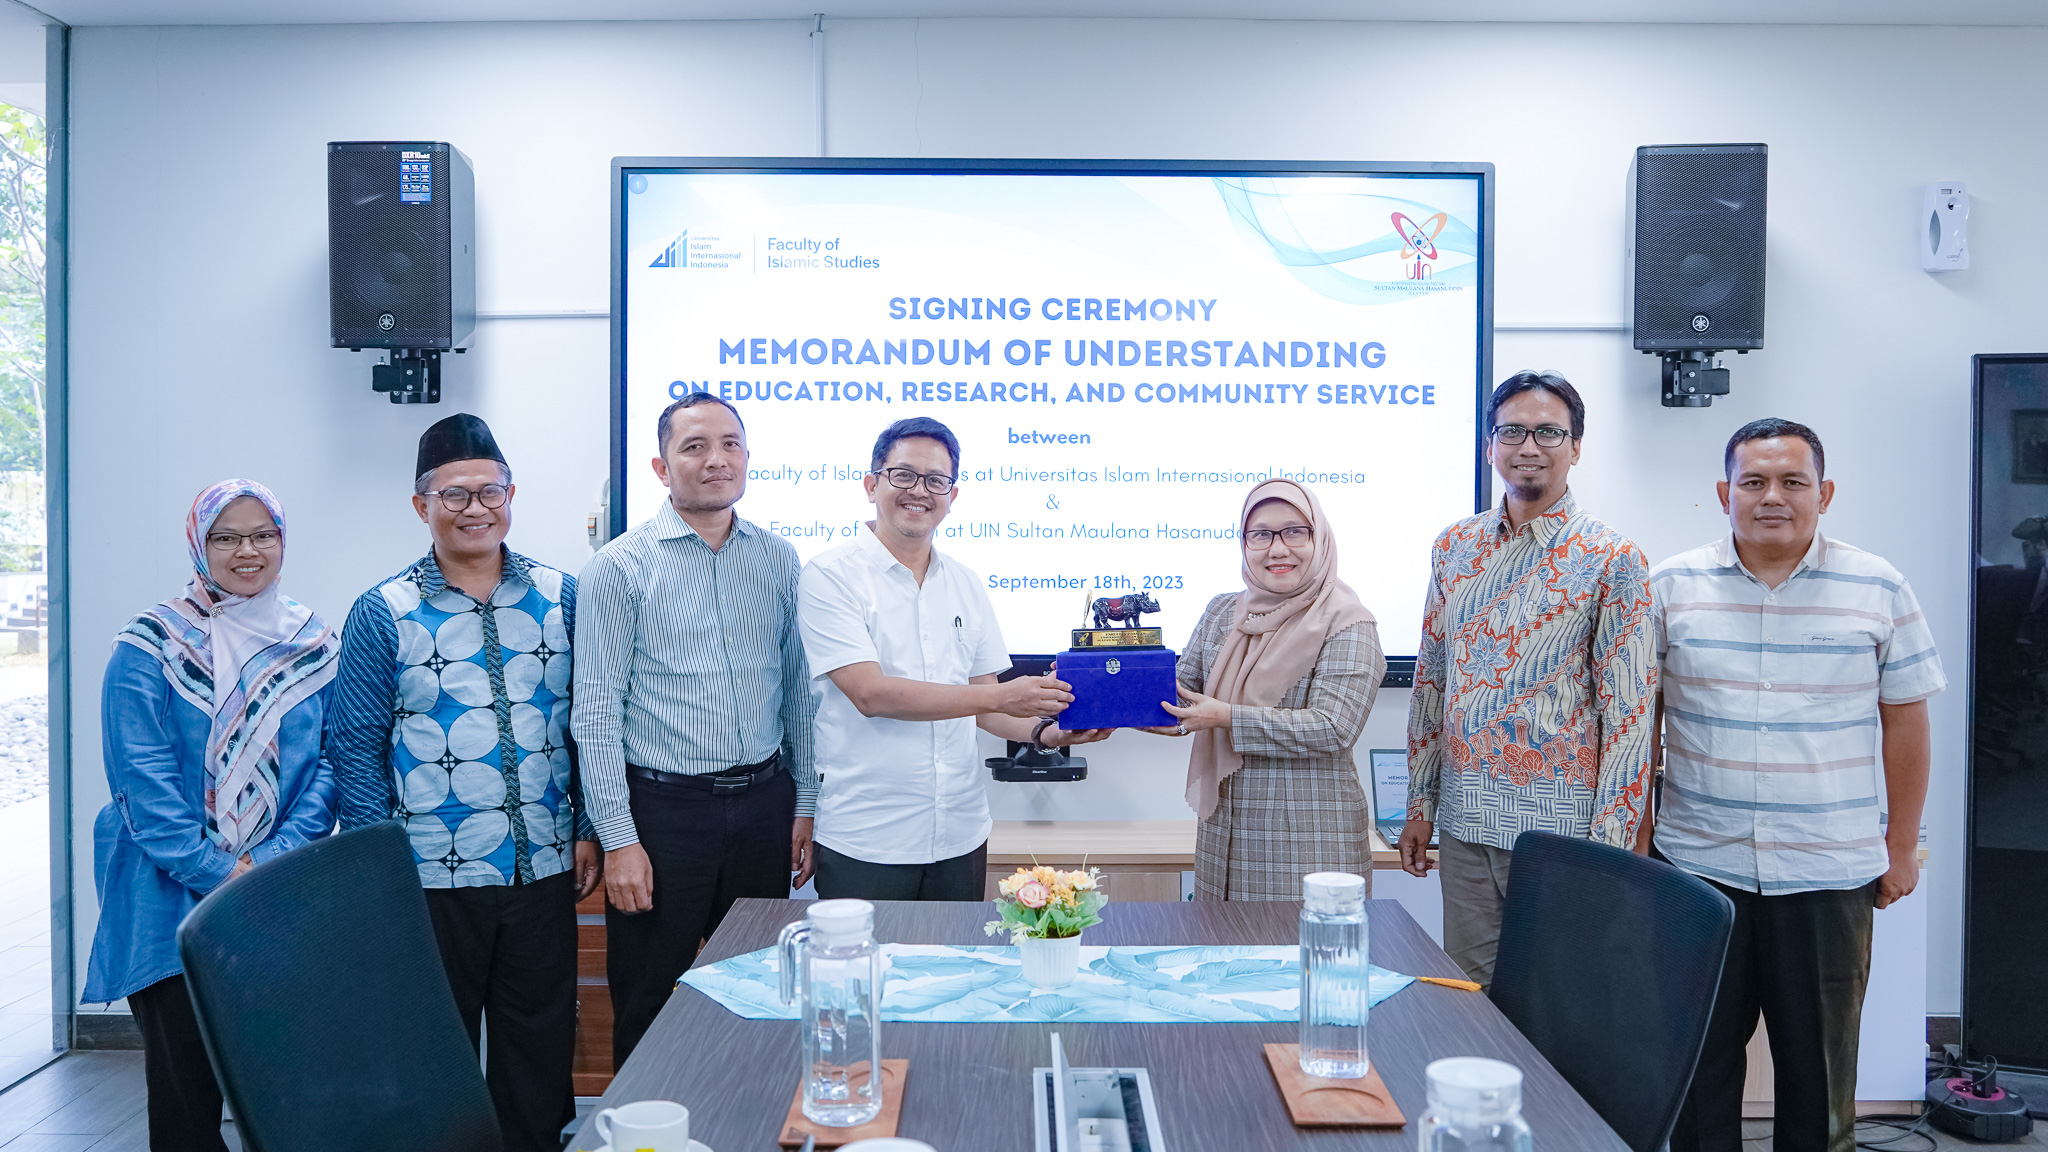  Fostering Academic Collaboration: MoU signed between the Faculty of Islamic Studies UIII and UIN Sultan Maulana Hasanuddin Banten